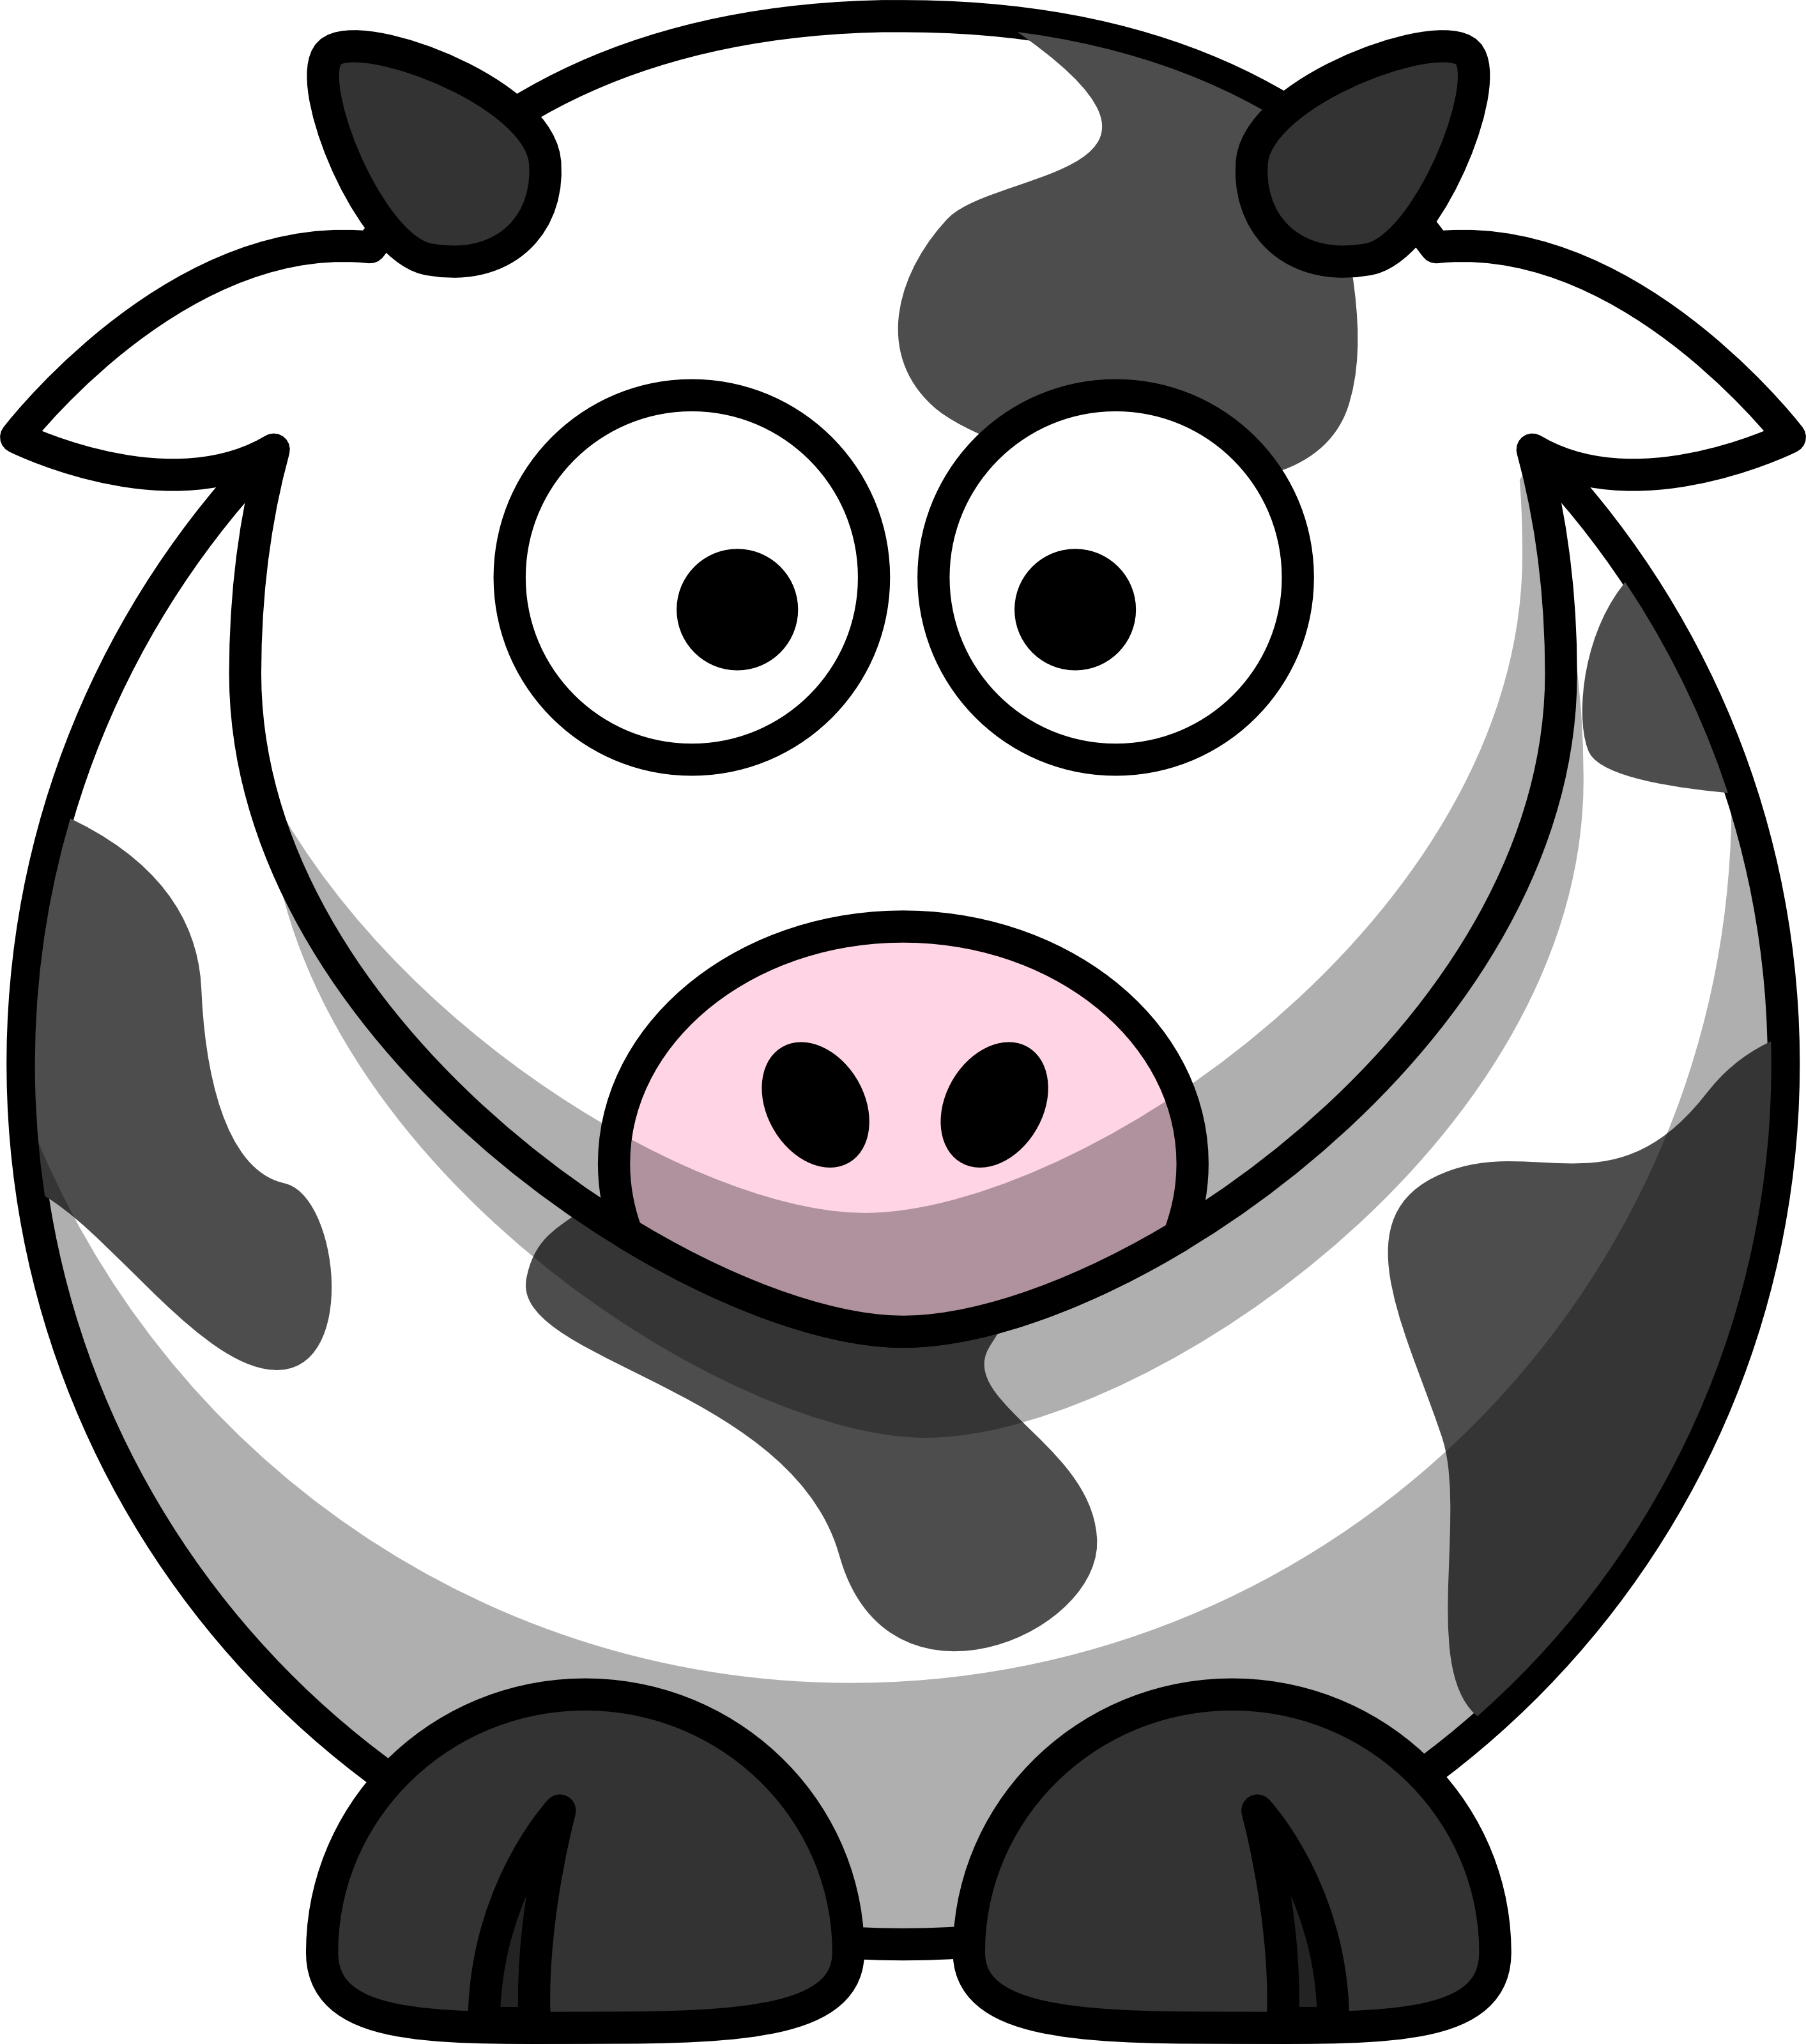 clipart images of cow - photo #15